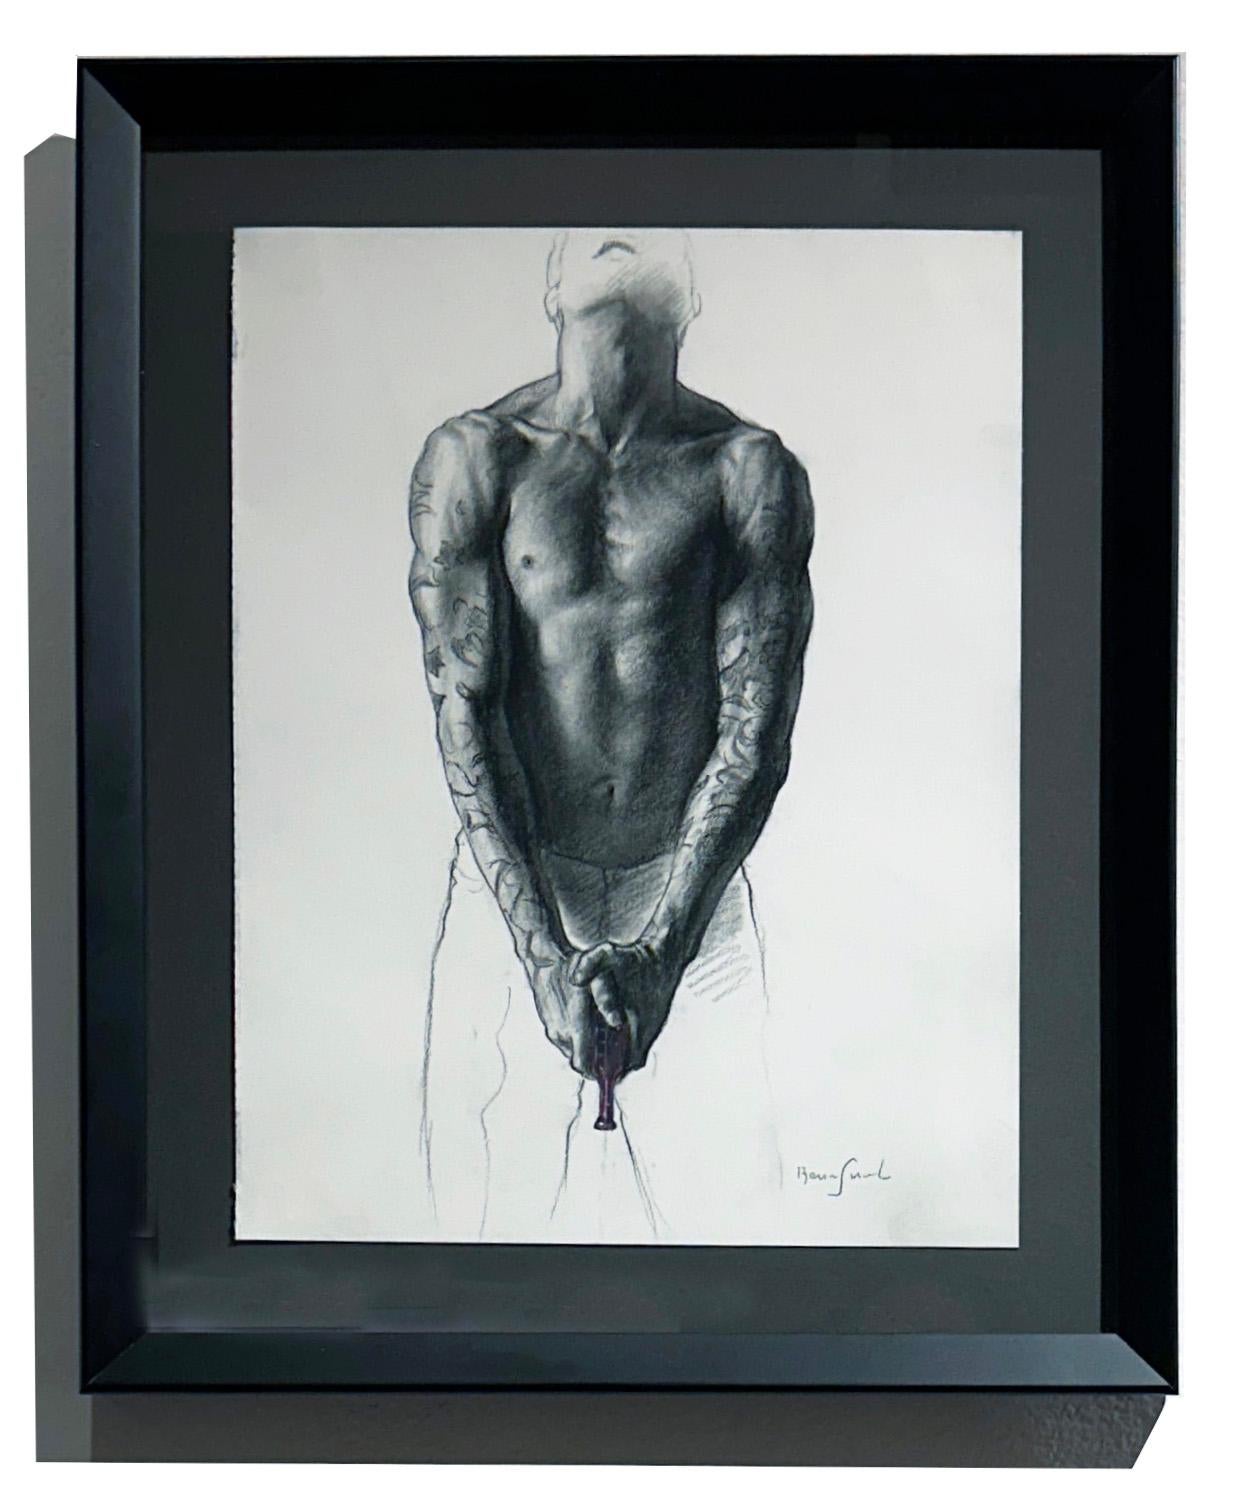 Strength - Tattooed Shirtless Man Holding a Purple Plastic Squirt Gun, Framed For Sale 1